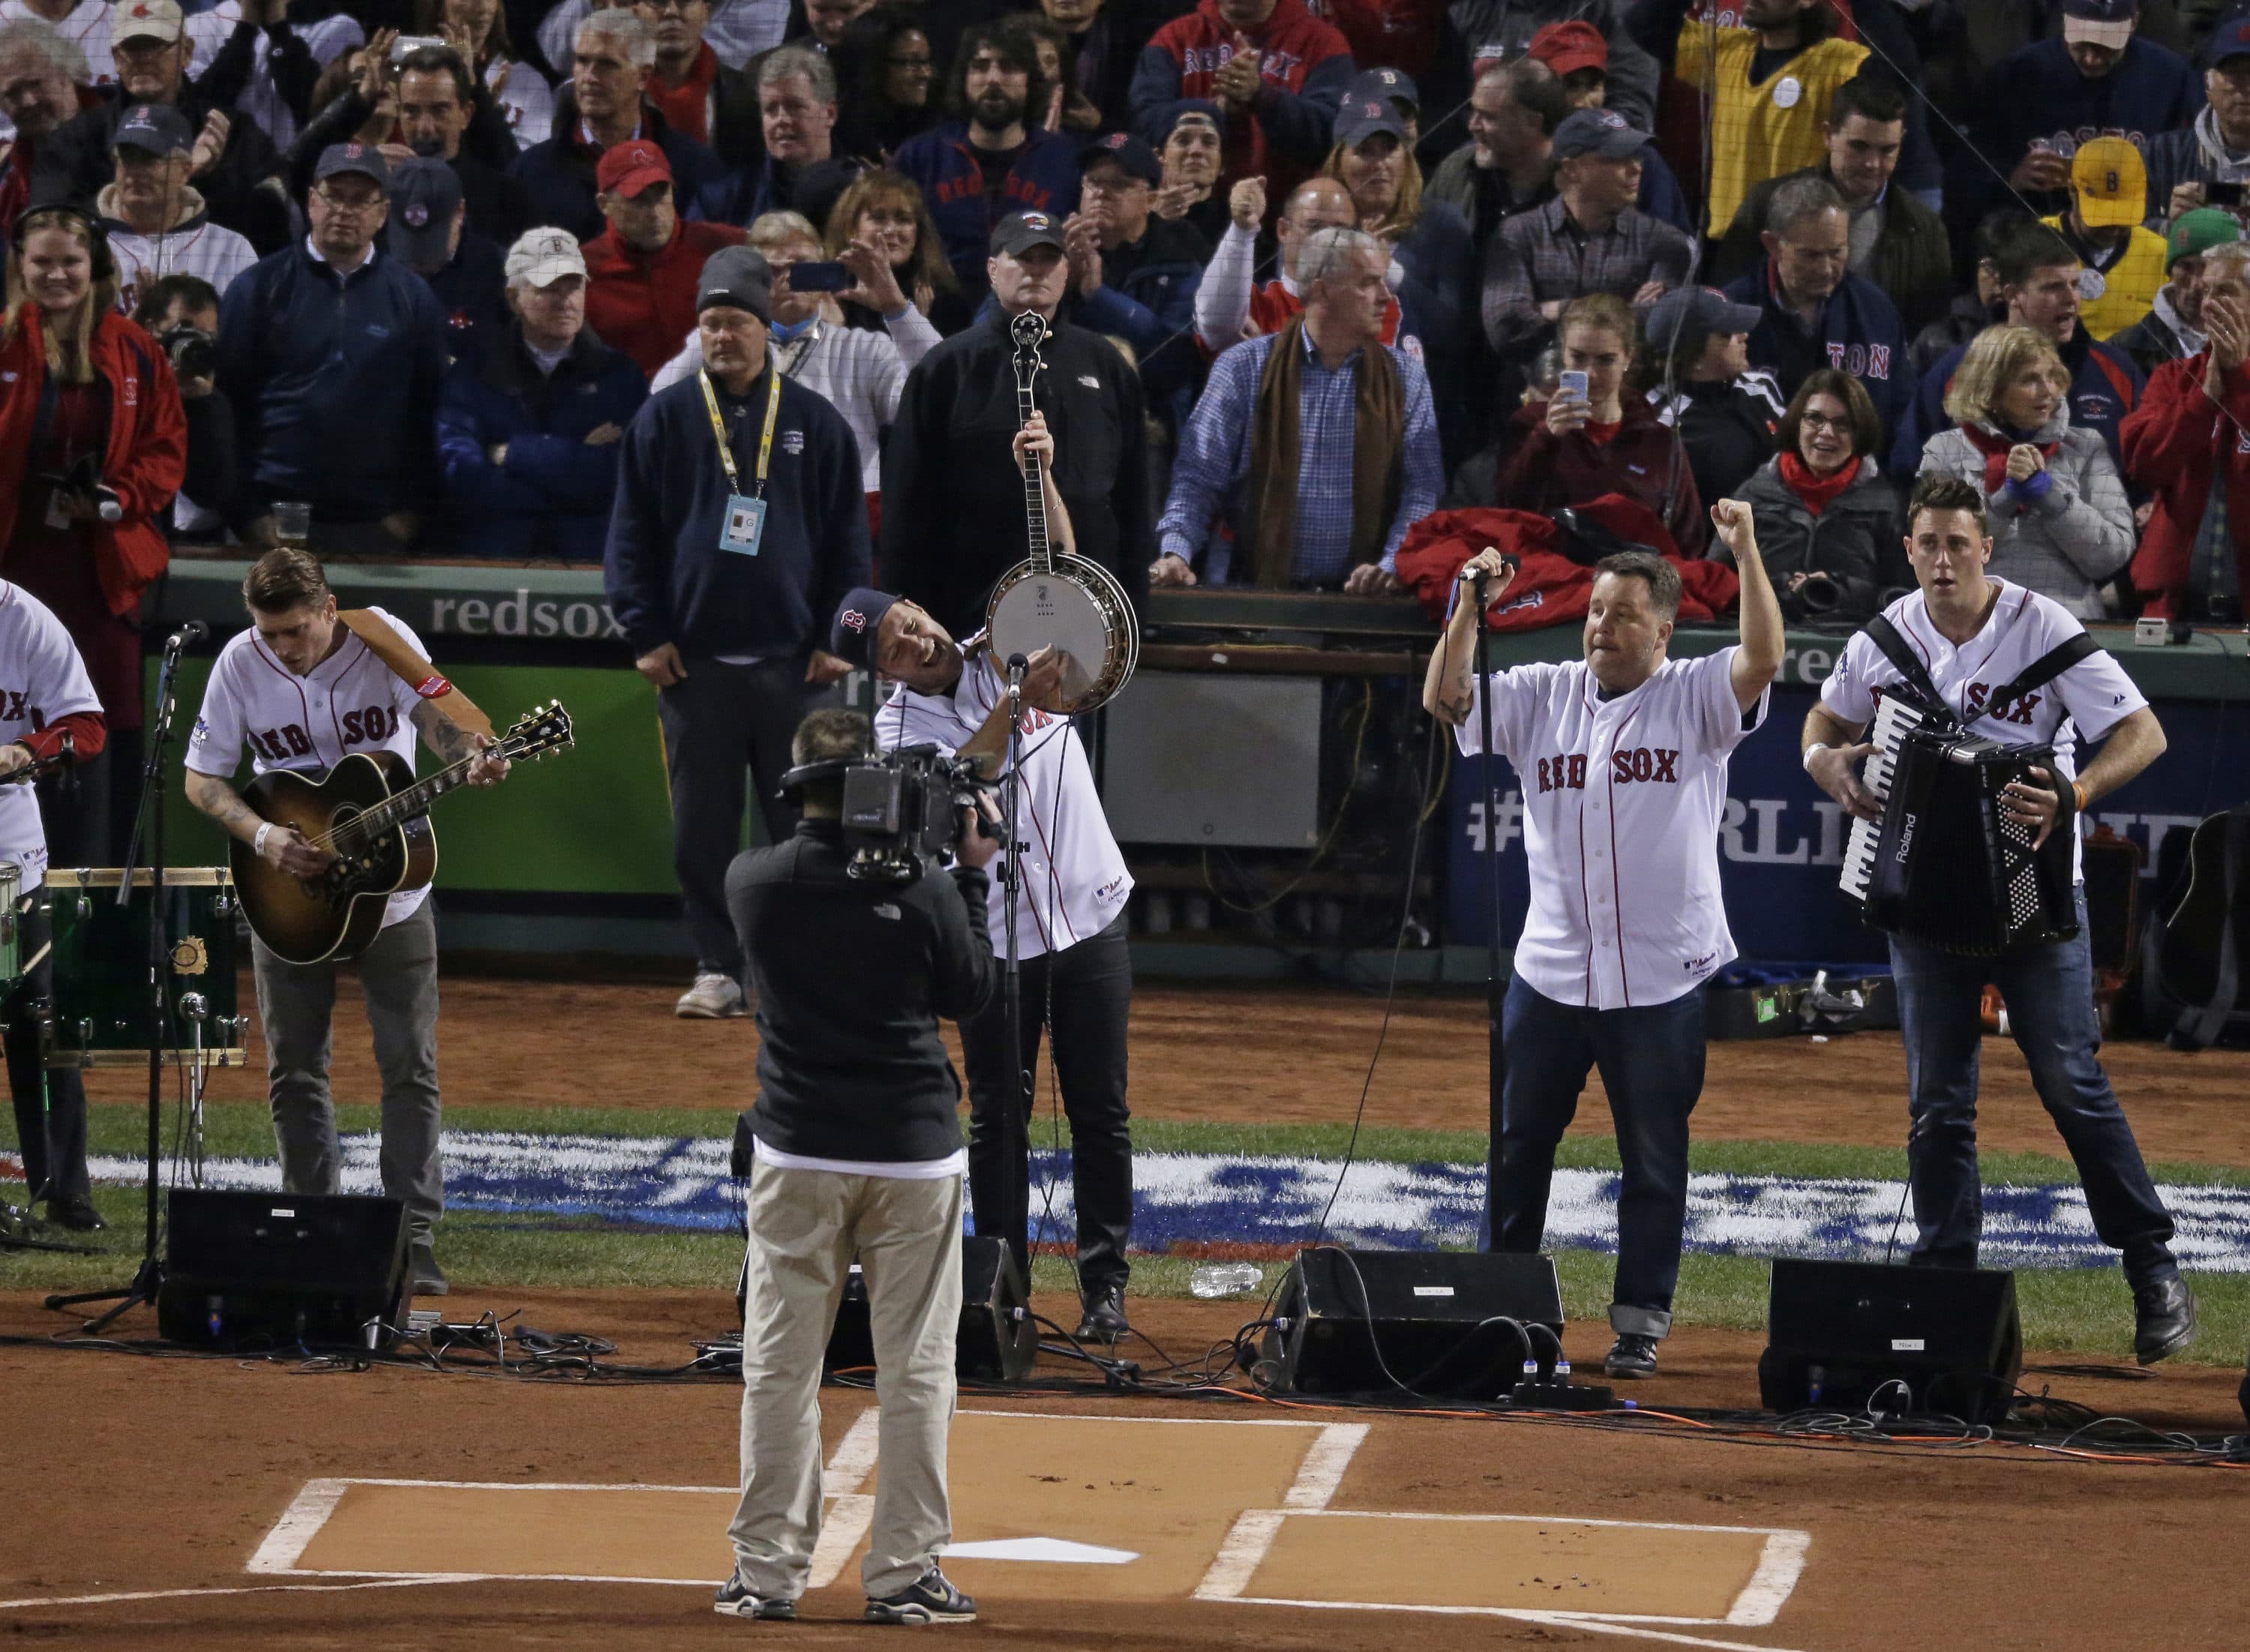 Dropkick Murphys perform before Game 6 of baseball's World Series between the Boston Red Sox and the St. Louis Cardinals Wednesday, Oct. 30, 2013, in Boston. (Charlie Riedel/AP)